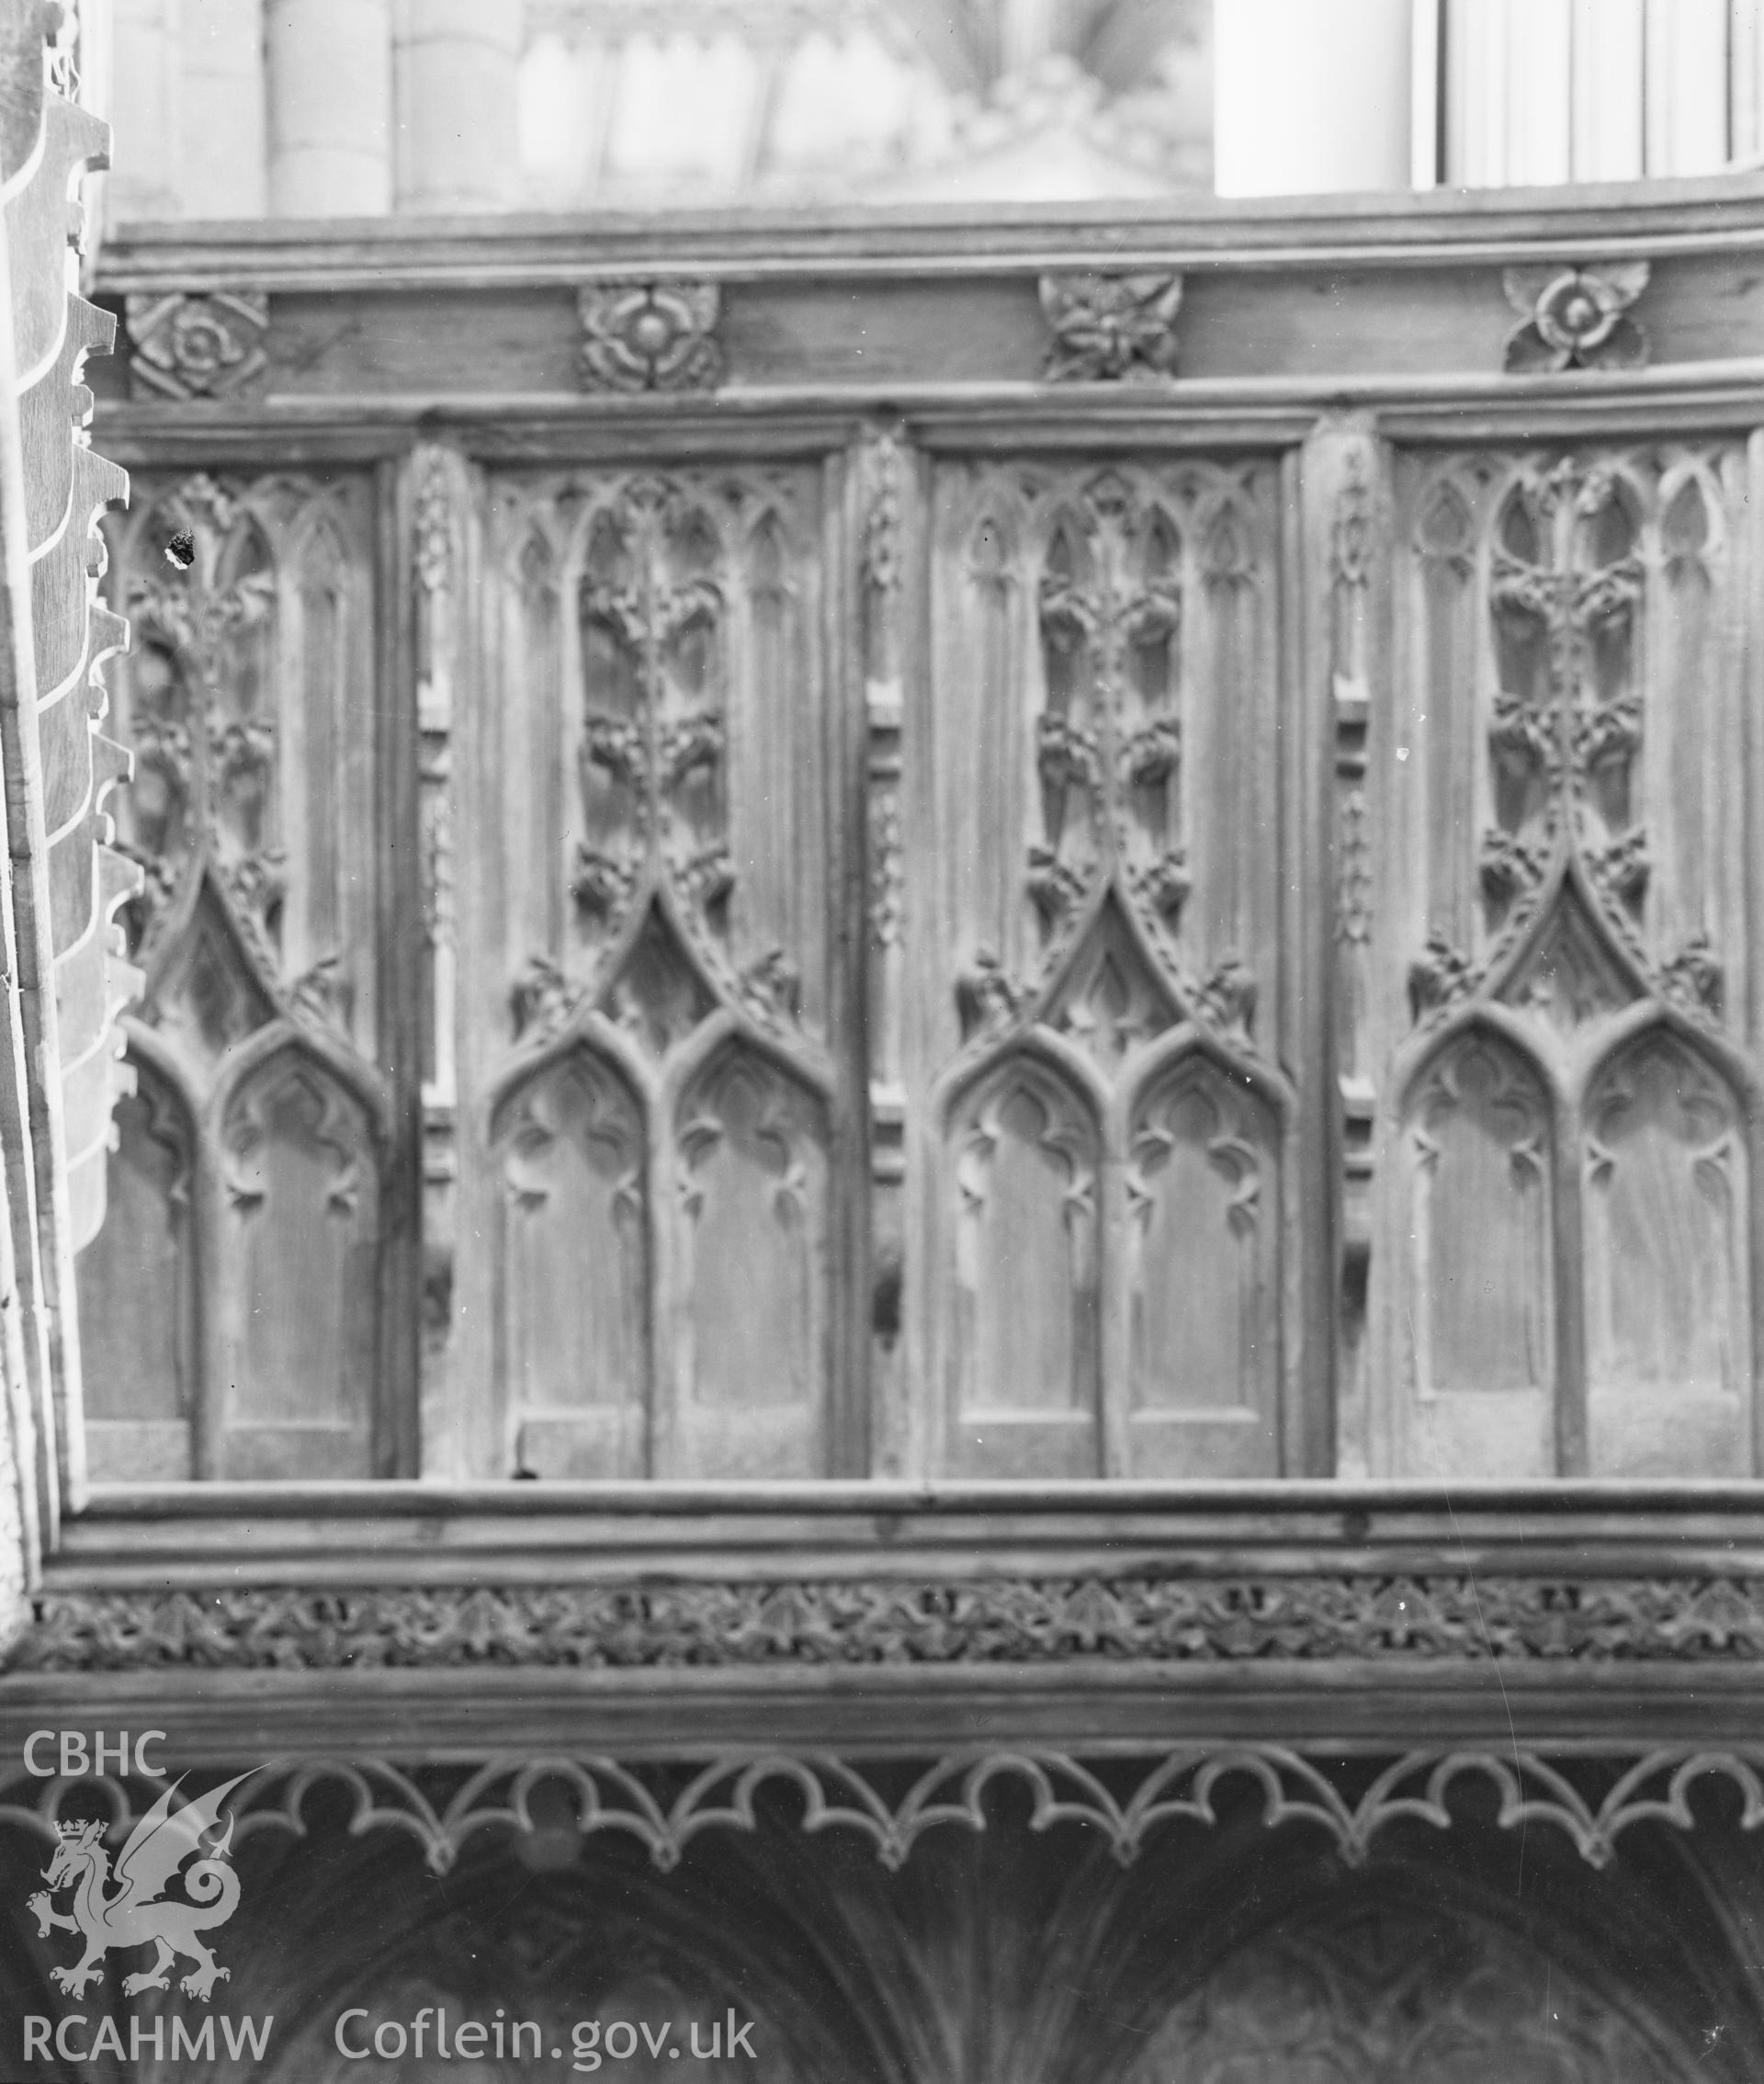 Digital copy of a black and white acetate negative showing fretwork in St. David's Cathedral, taken by E.W. Lovegrove, July 1936